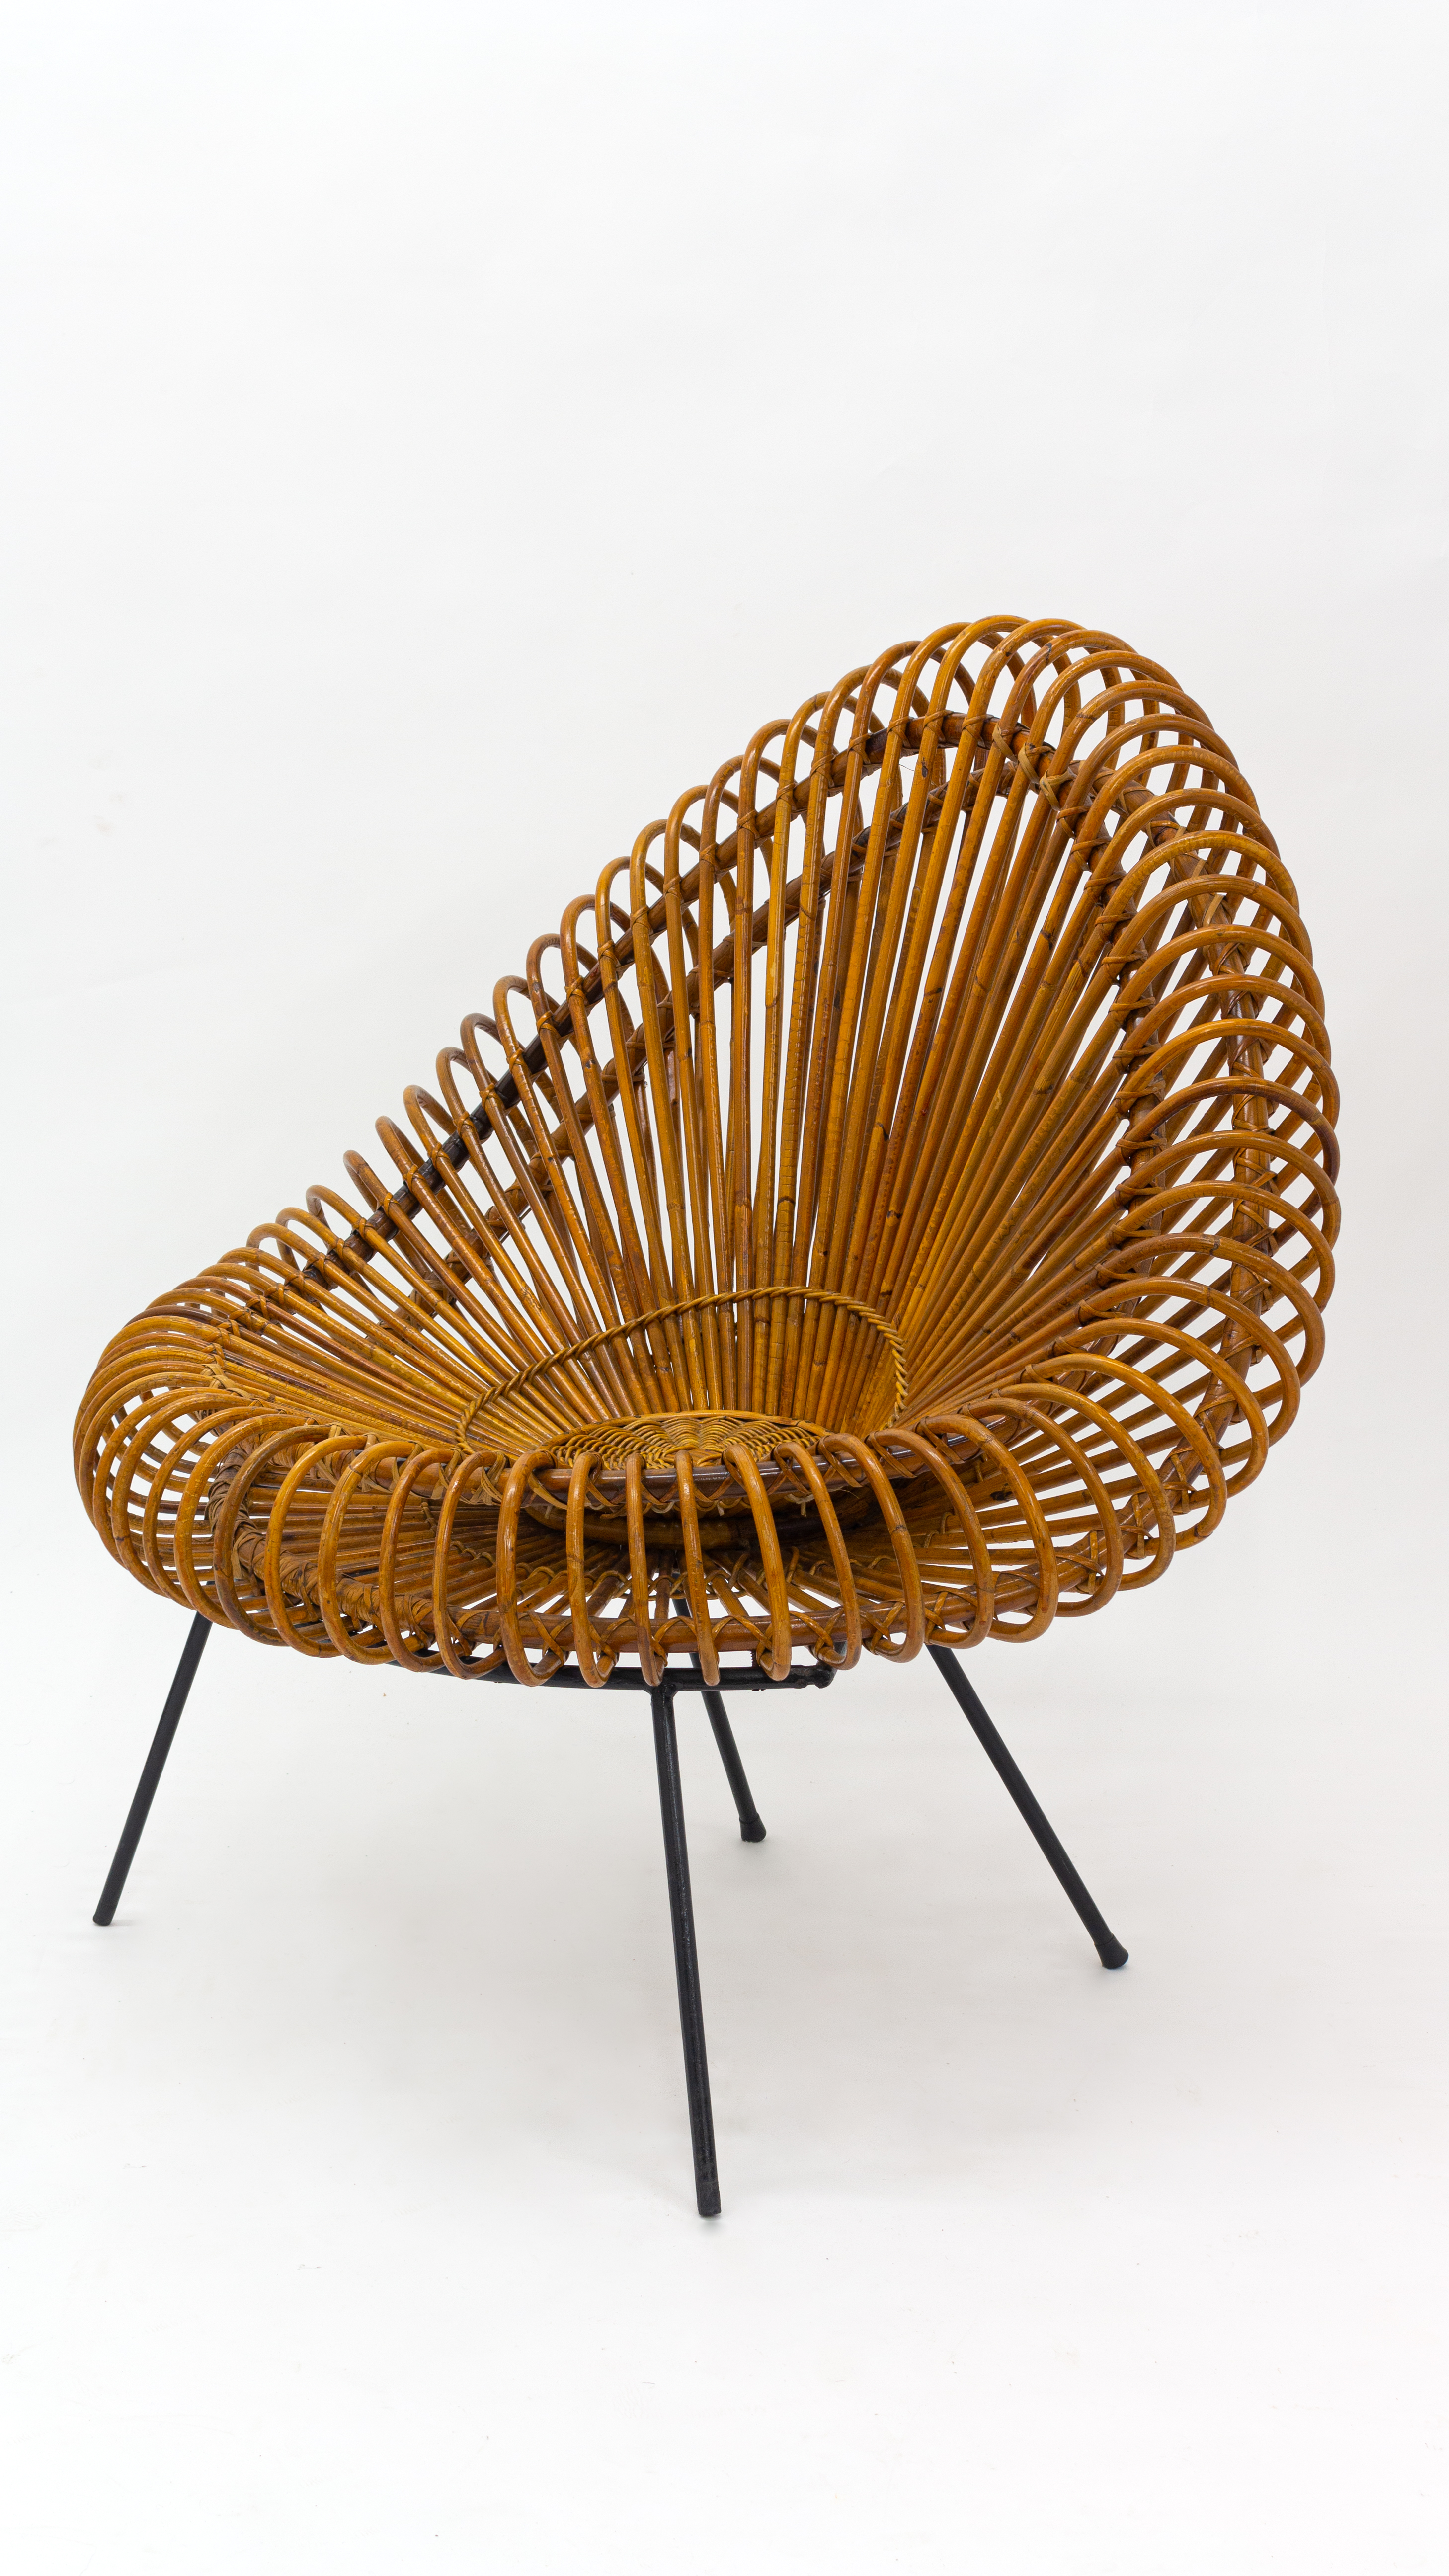 A stylish rattan and iron chair designed by Janine Abraham.